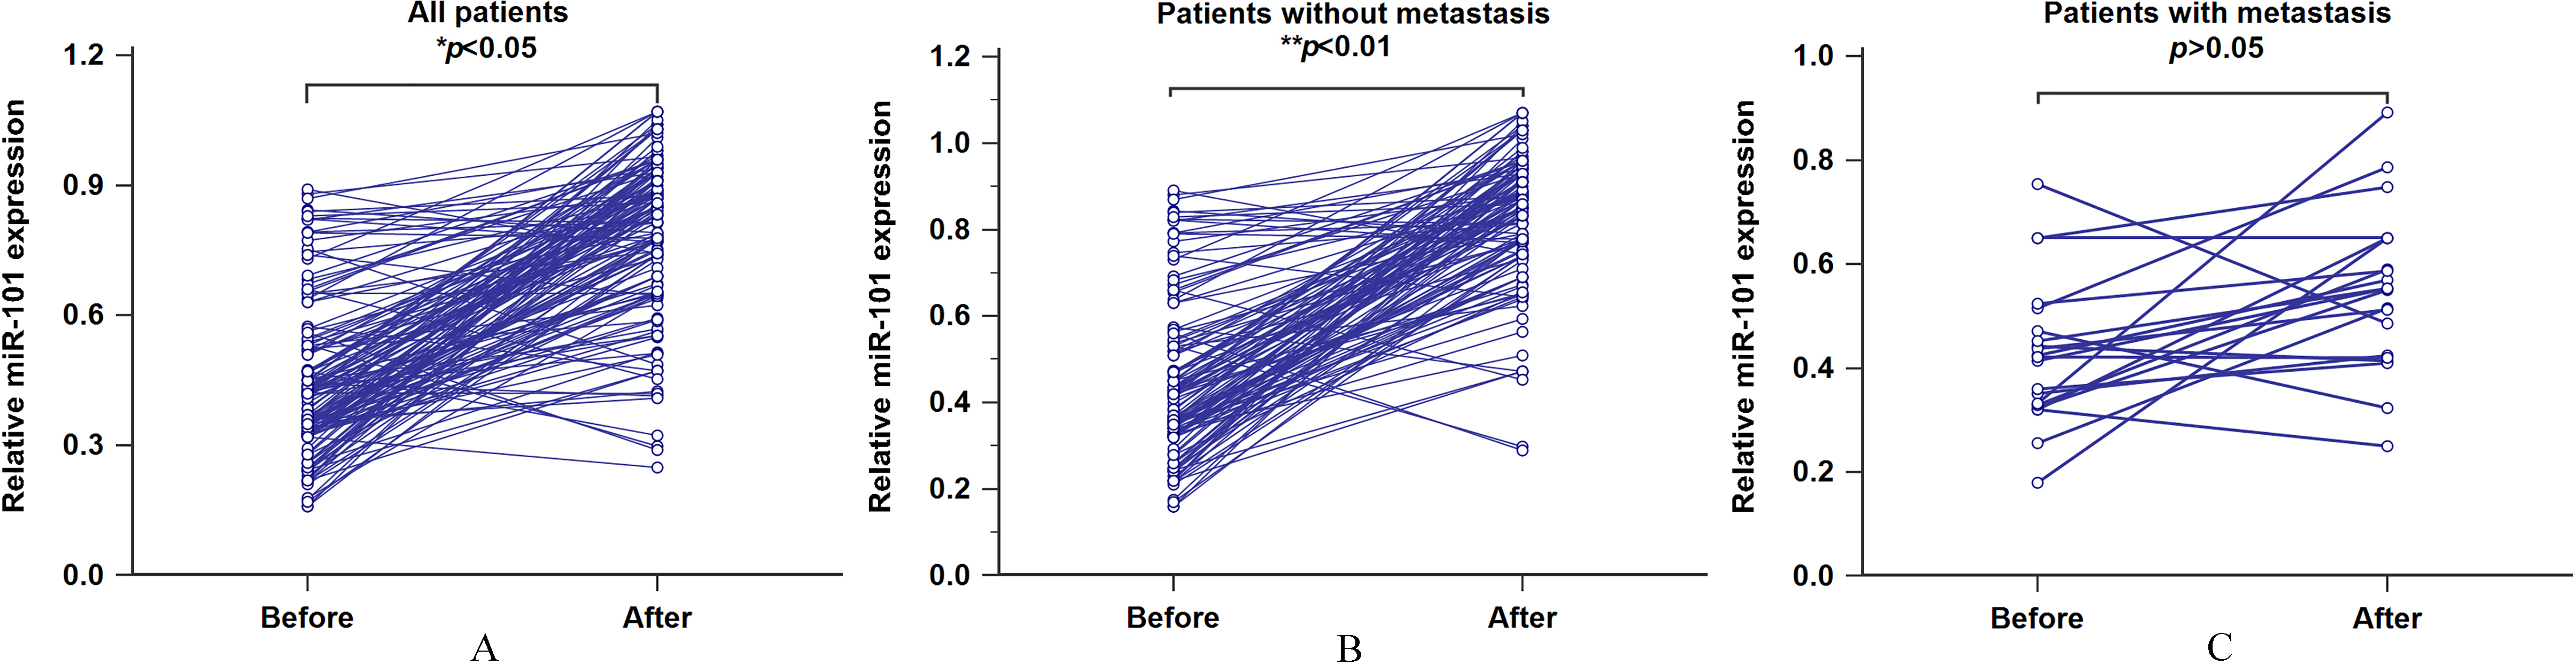 A. The association between serum miR-101 levels and therapeutic response for all patients. B. The association between serum miR-101 levels and therapeutic response for the patients without metastasis. C. The association between serum miR-101 levels and therapeutic response for the patients with metastasis.